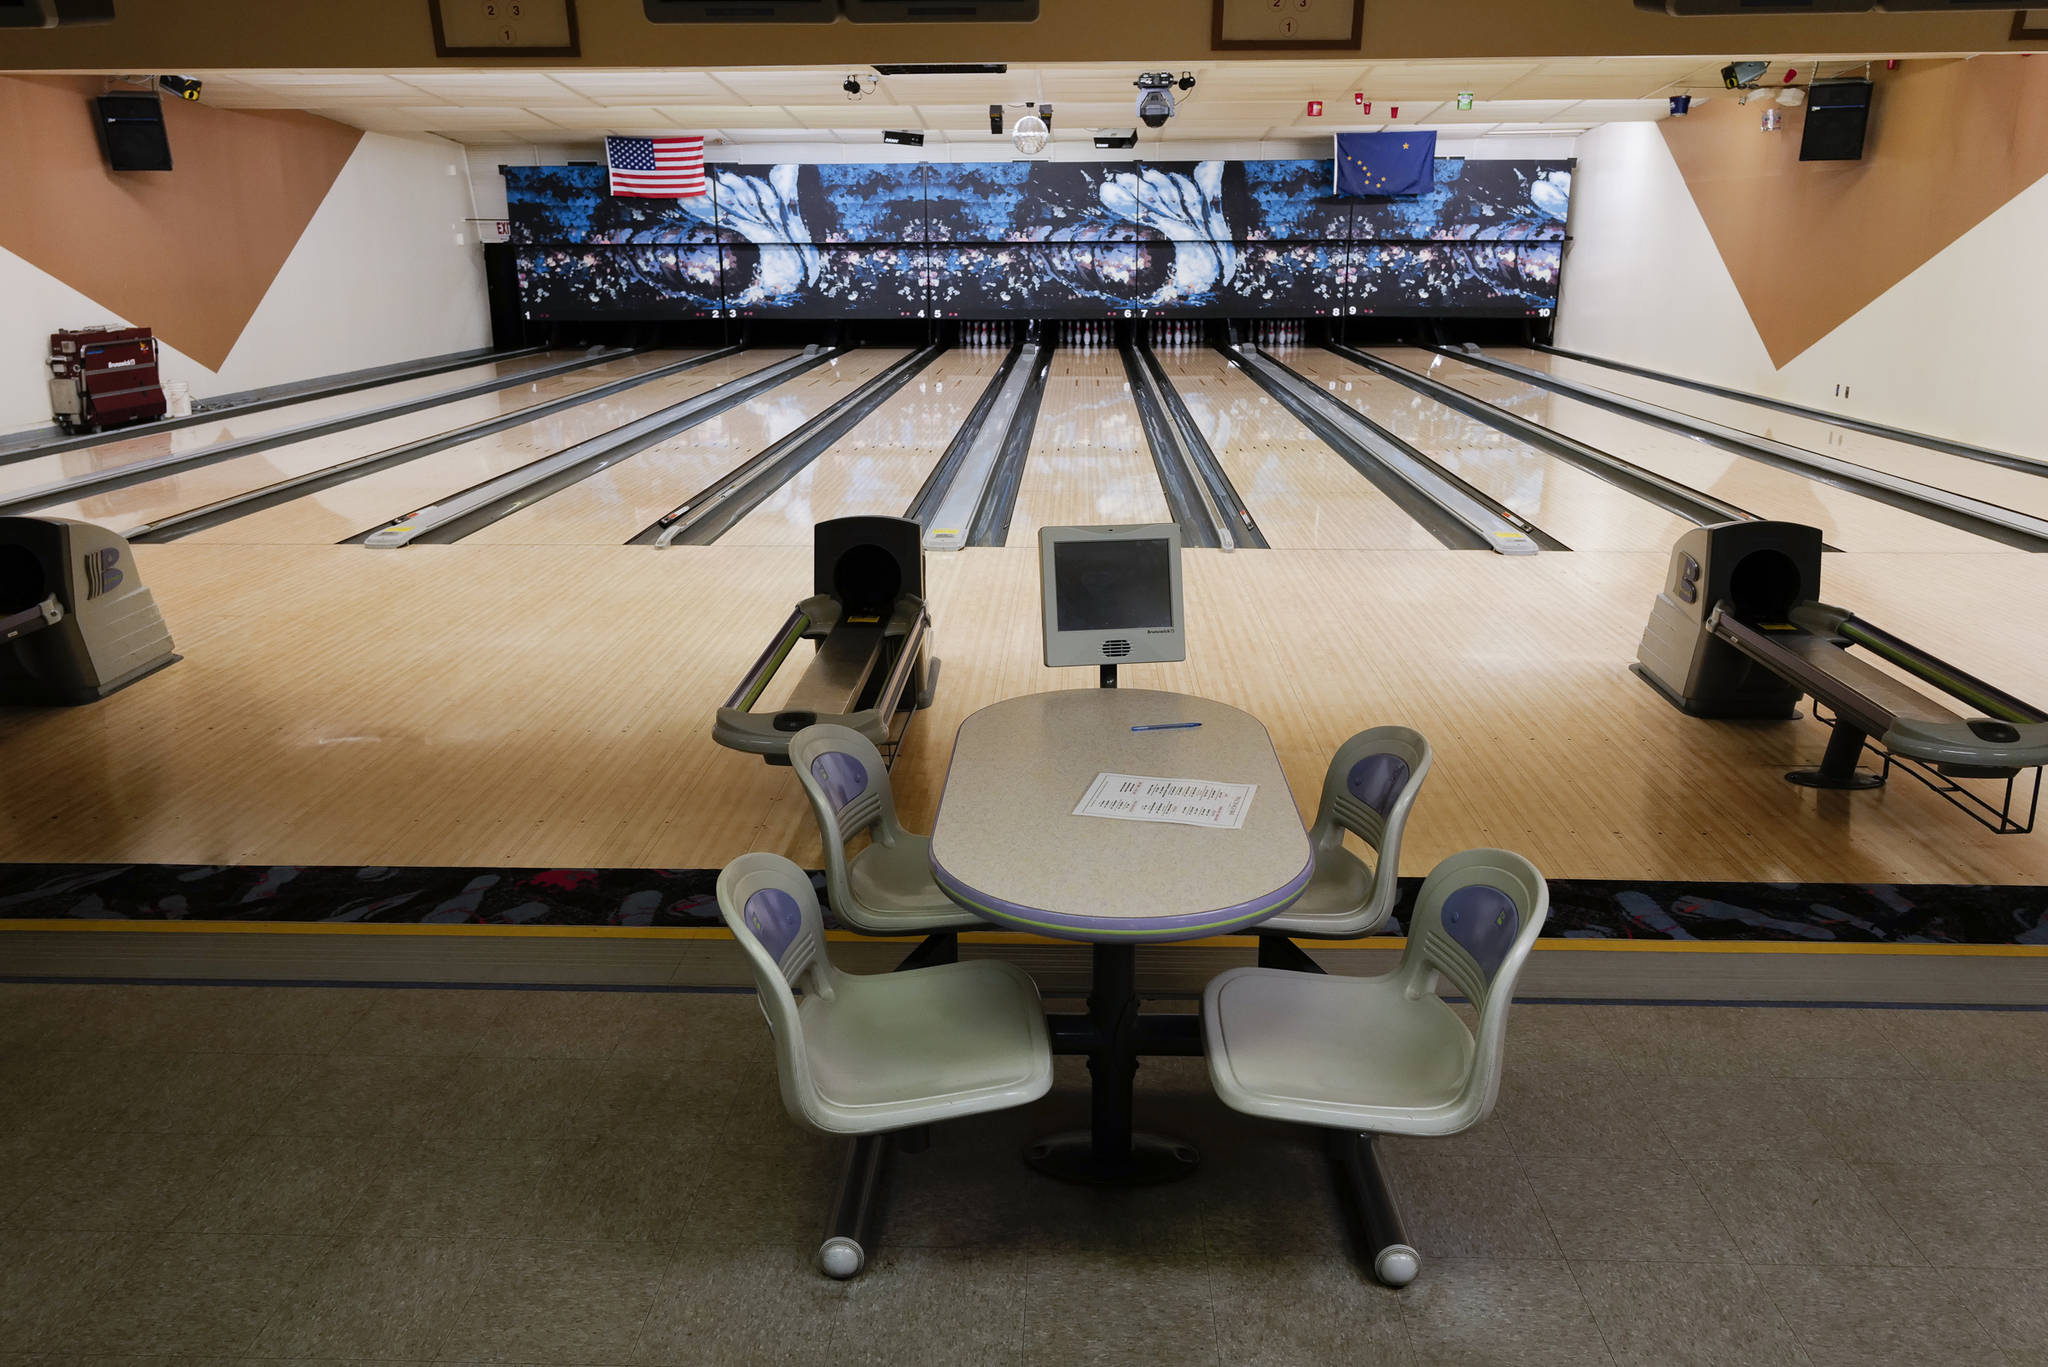 PINZ lanes sit open for bowlers Tuesday, Nov. 12, 2019. The Alcoholic Beverage Control Board voted to renew Taku Lanes liquor license during the meeting on Tuesday. It will now need to be transferred to PINZ in order for the bowling alley to serve wine and beer. (Michael Penn | Juneau Empire)